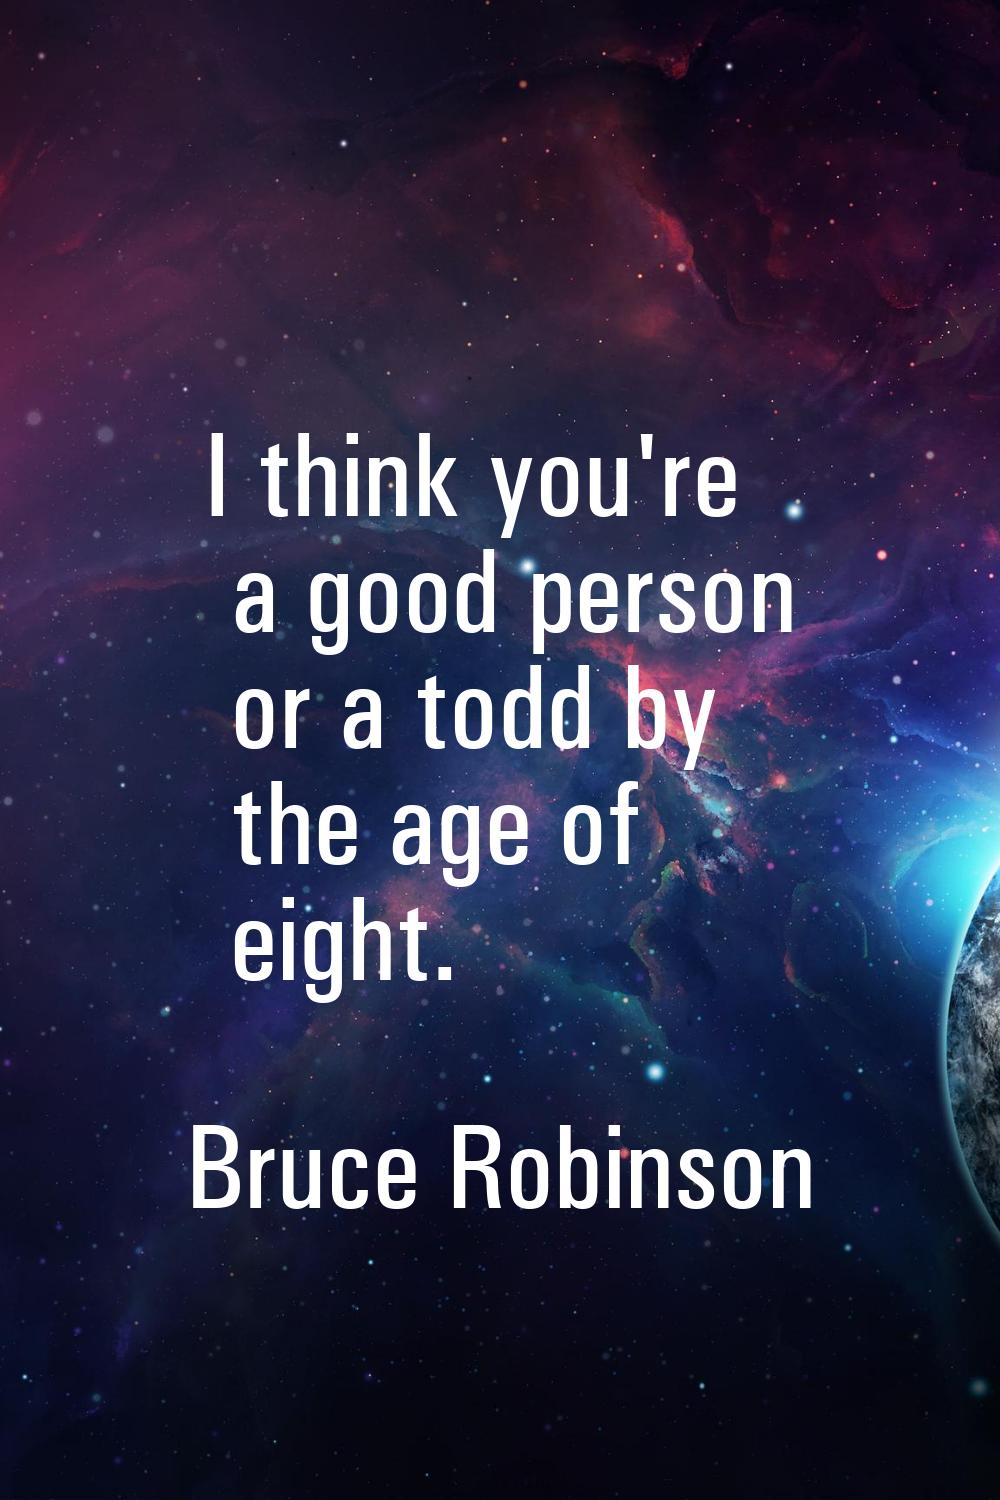 I think you're a good person or a todd by the age of eight.